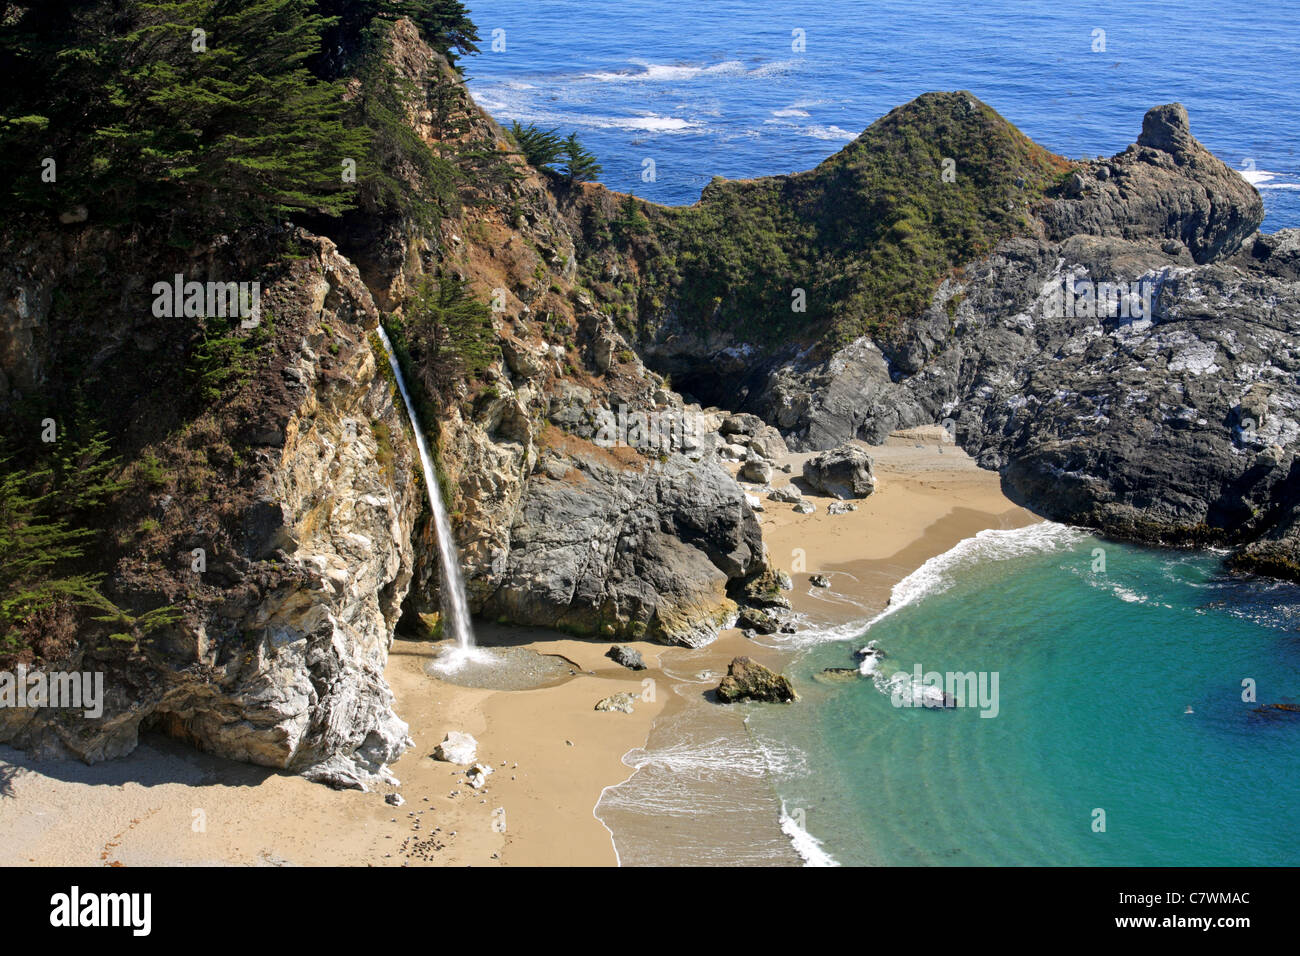 McWay Falls in California's Big Sur is an 80 foot tidefall that flows year-round. Stock Photo